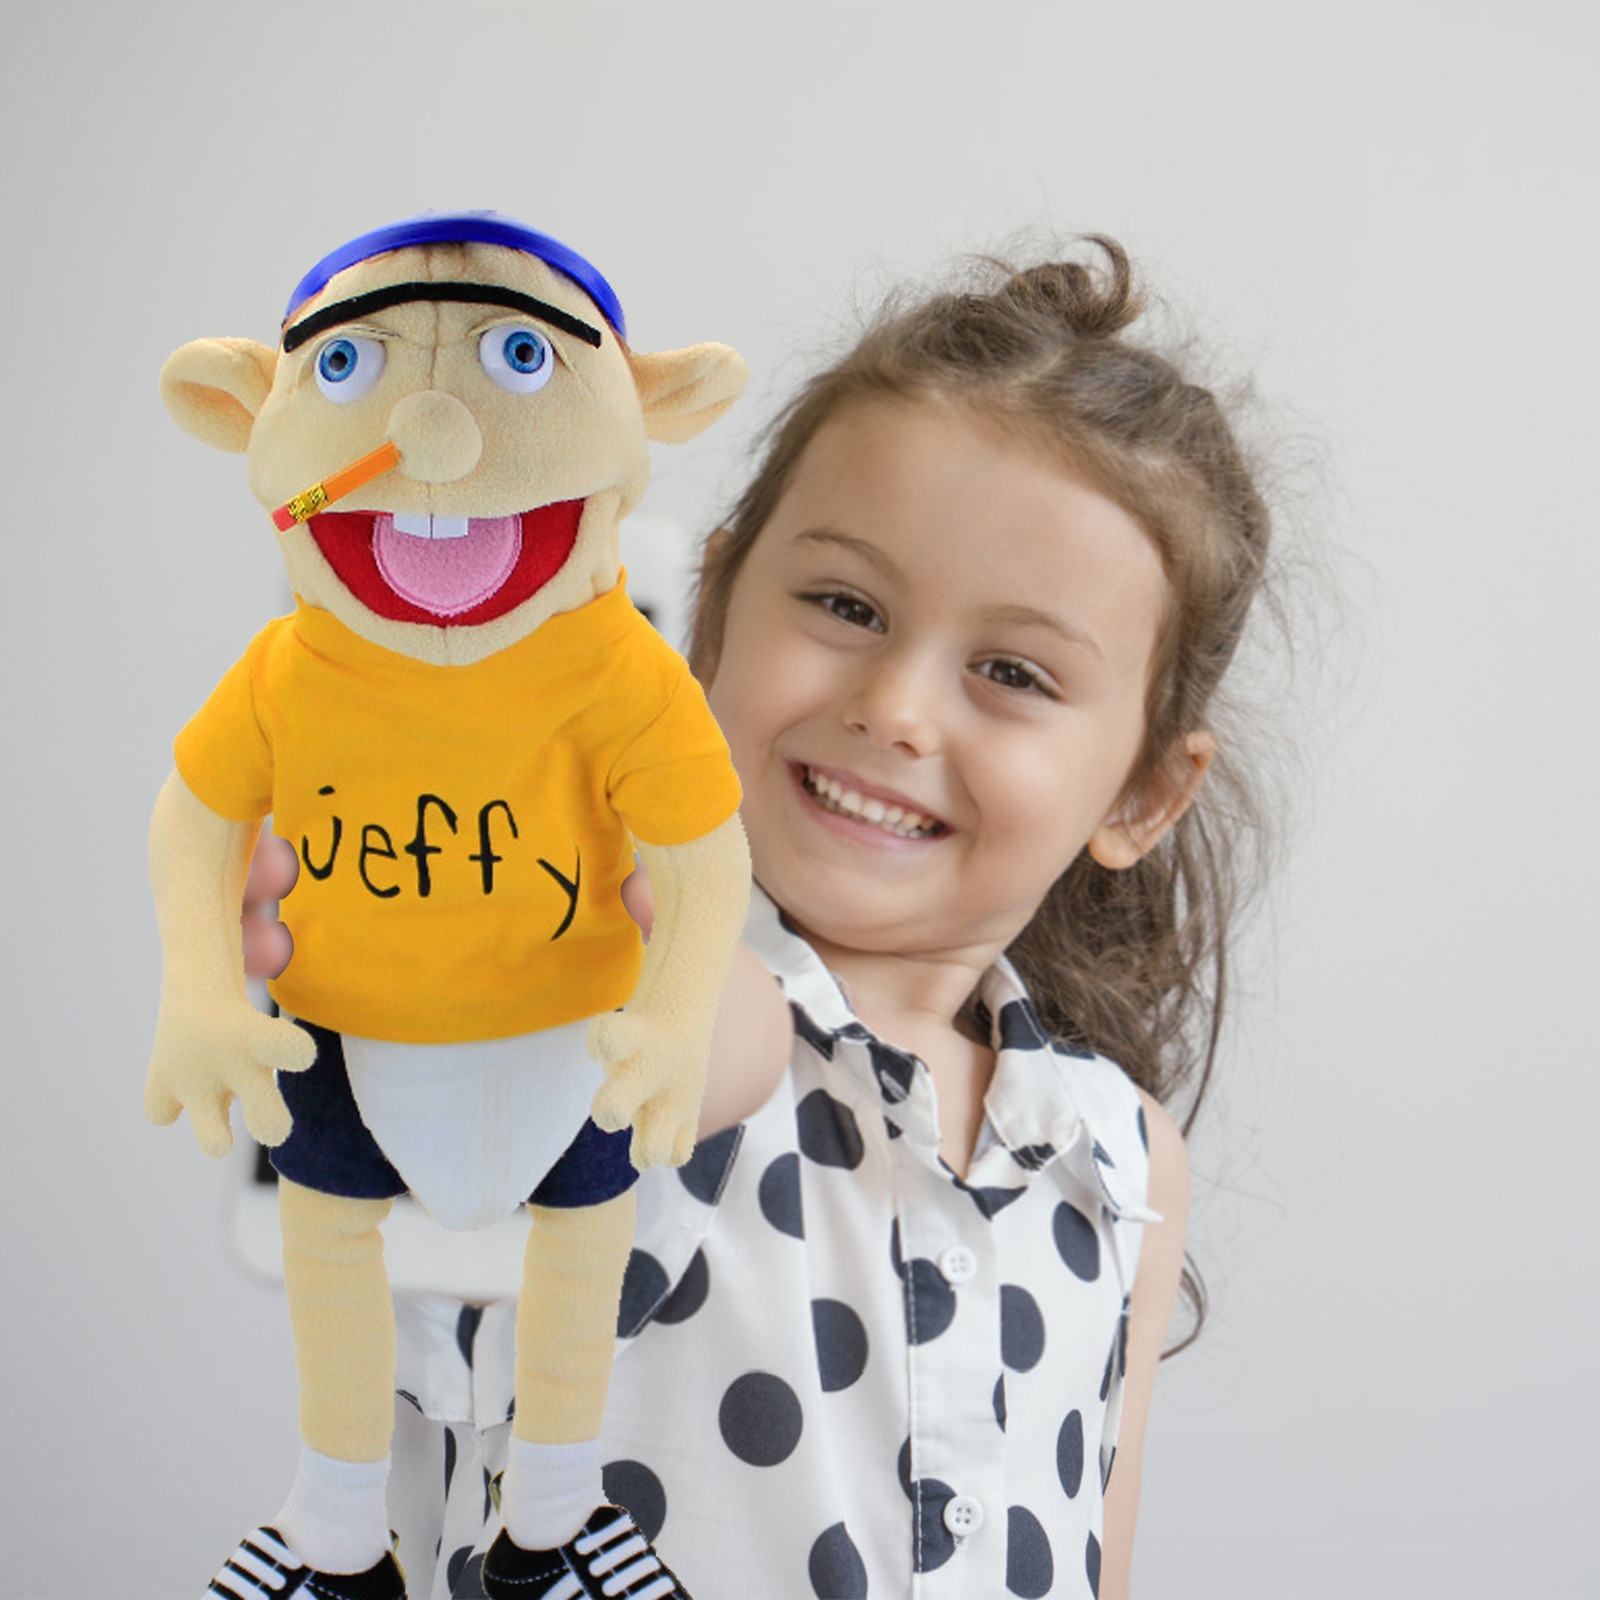 Jeffy Hand Puppet Jeffy Plush Doll 60cm Soft Talk Show & Christmas Prop For  Kids Perfect Gift From Tz6607, $17.76